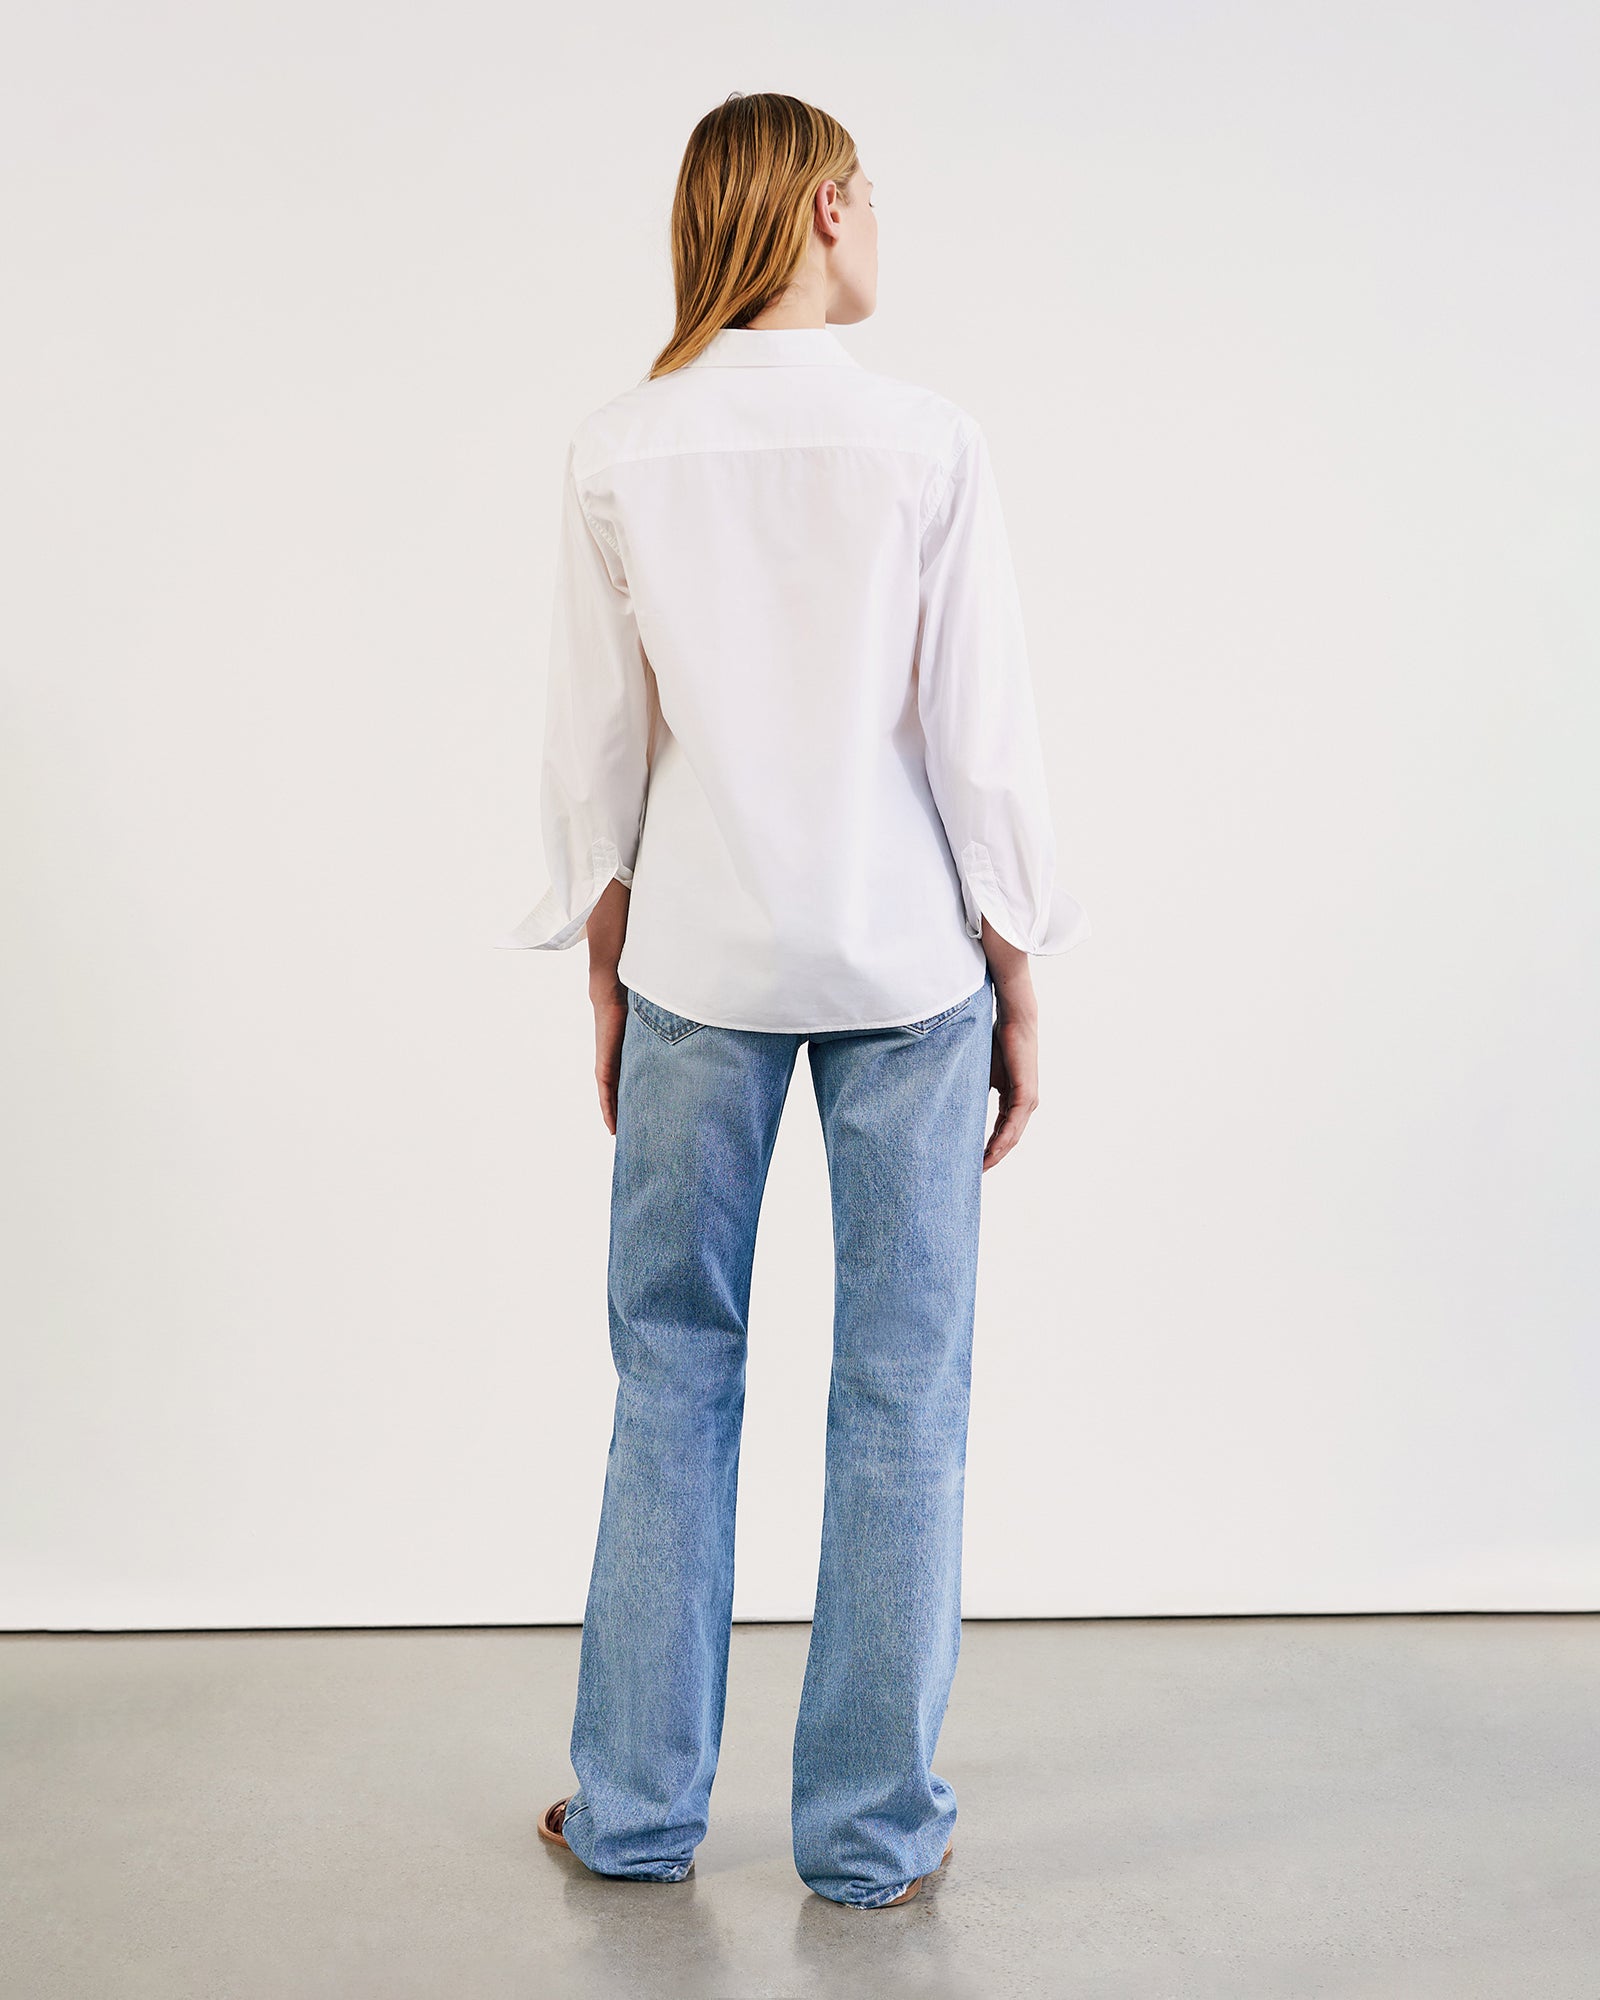 The Nili Lotan Raphael Classic Shirt in White available at The New Trend Australia